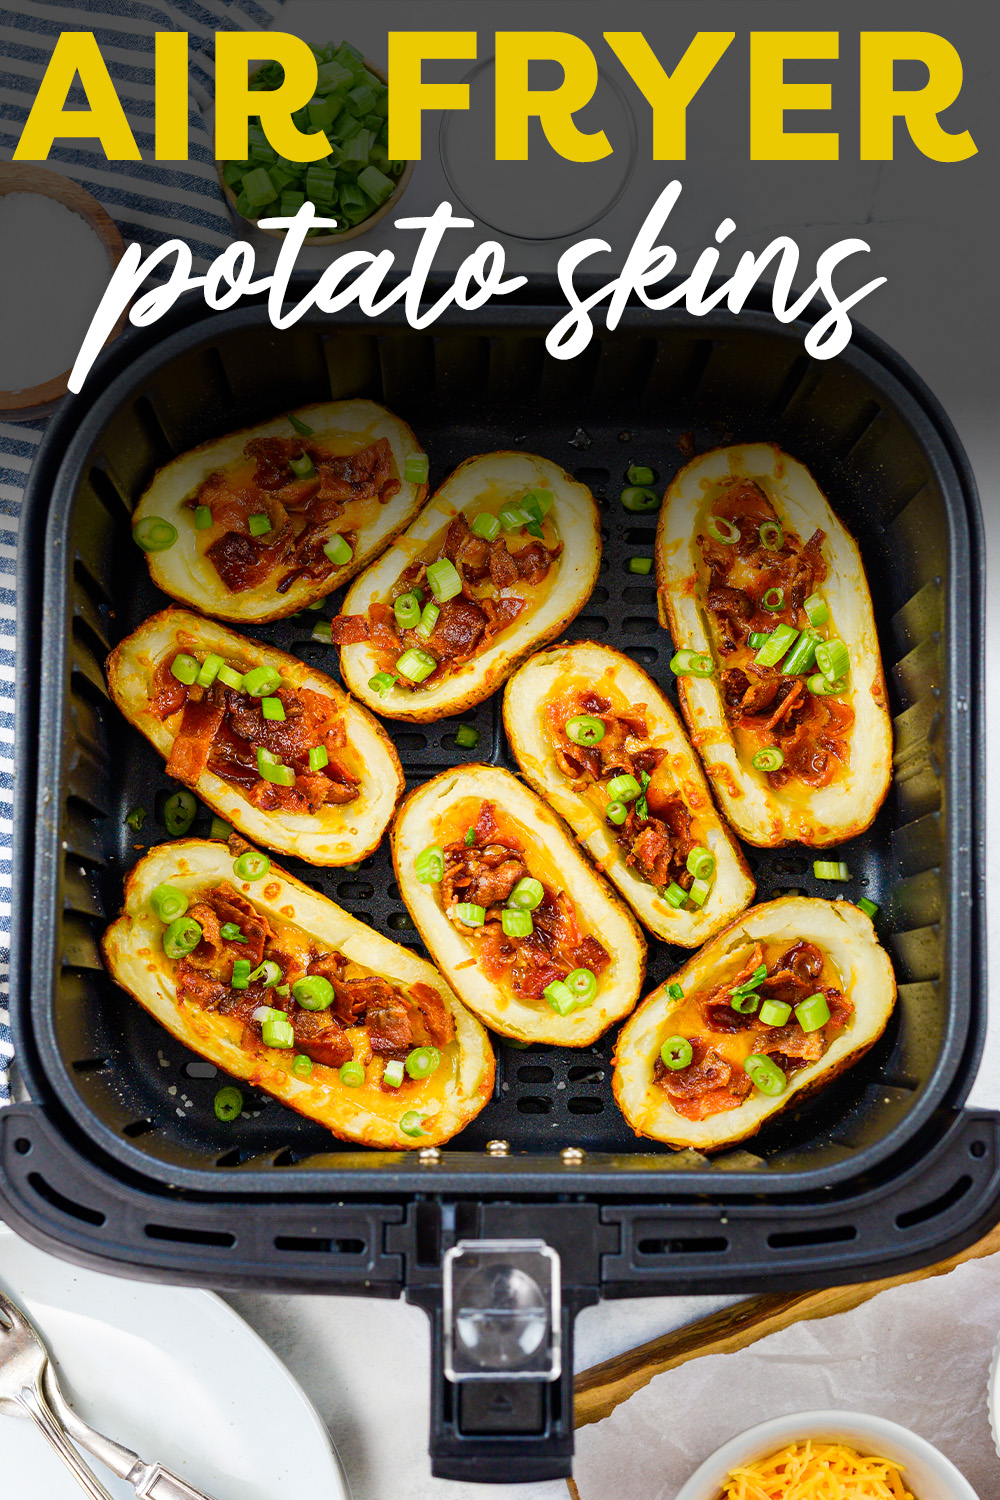 These potato skins have a beautiful crispy skin and are loaded with bacon, cheese, and sour cream!